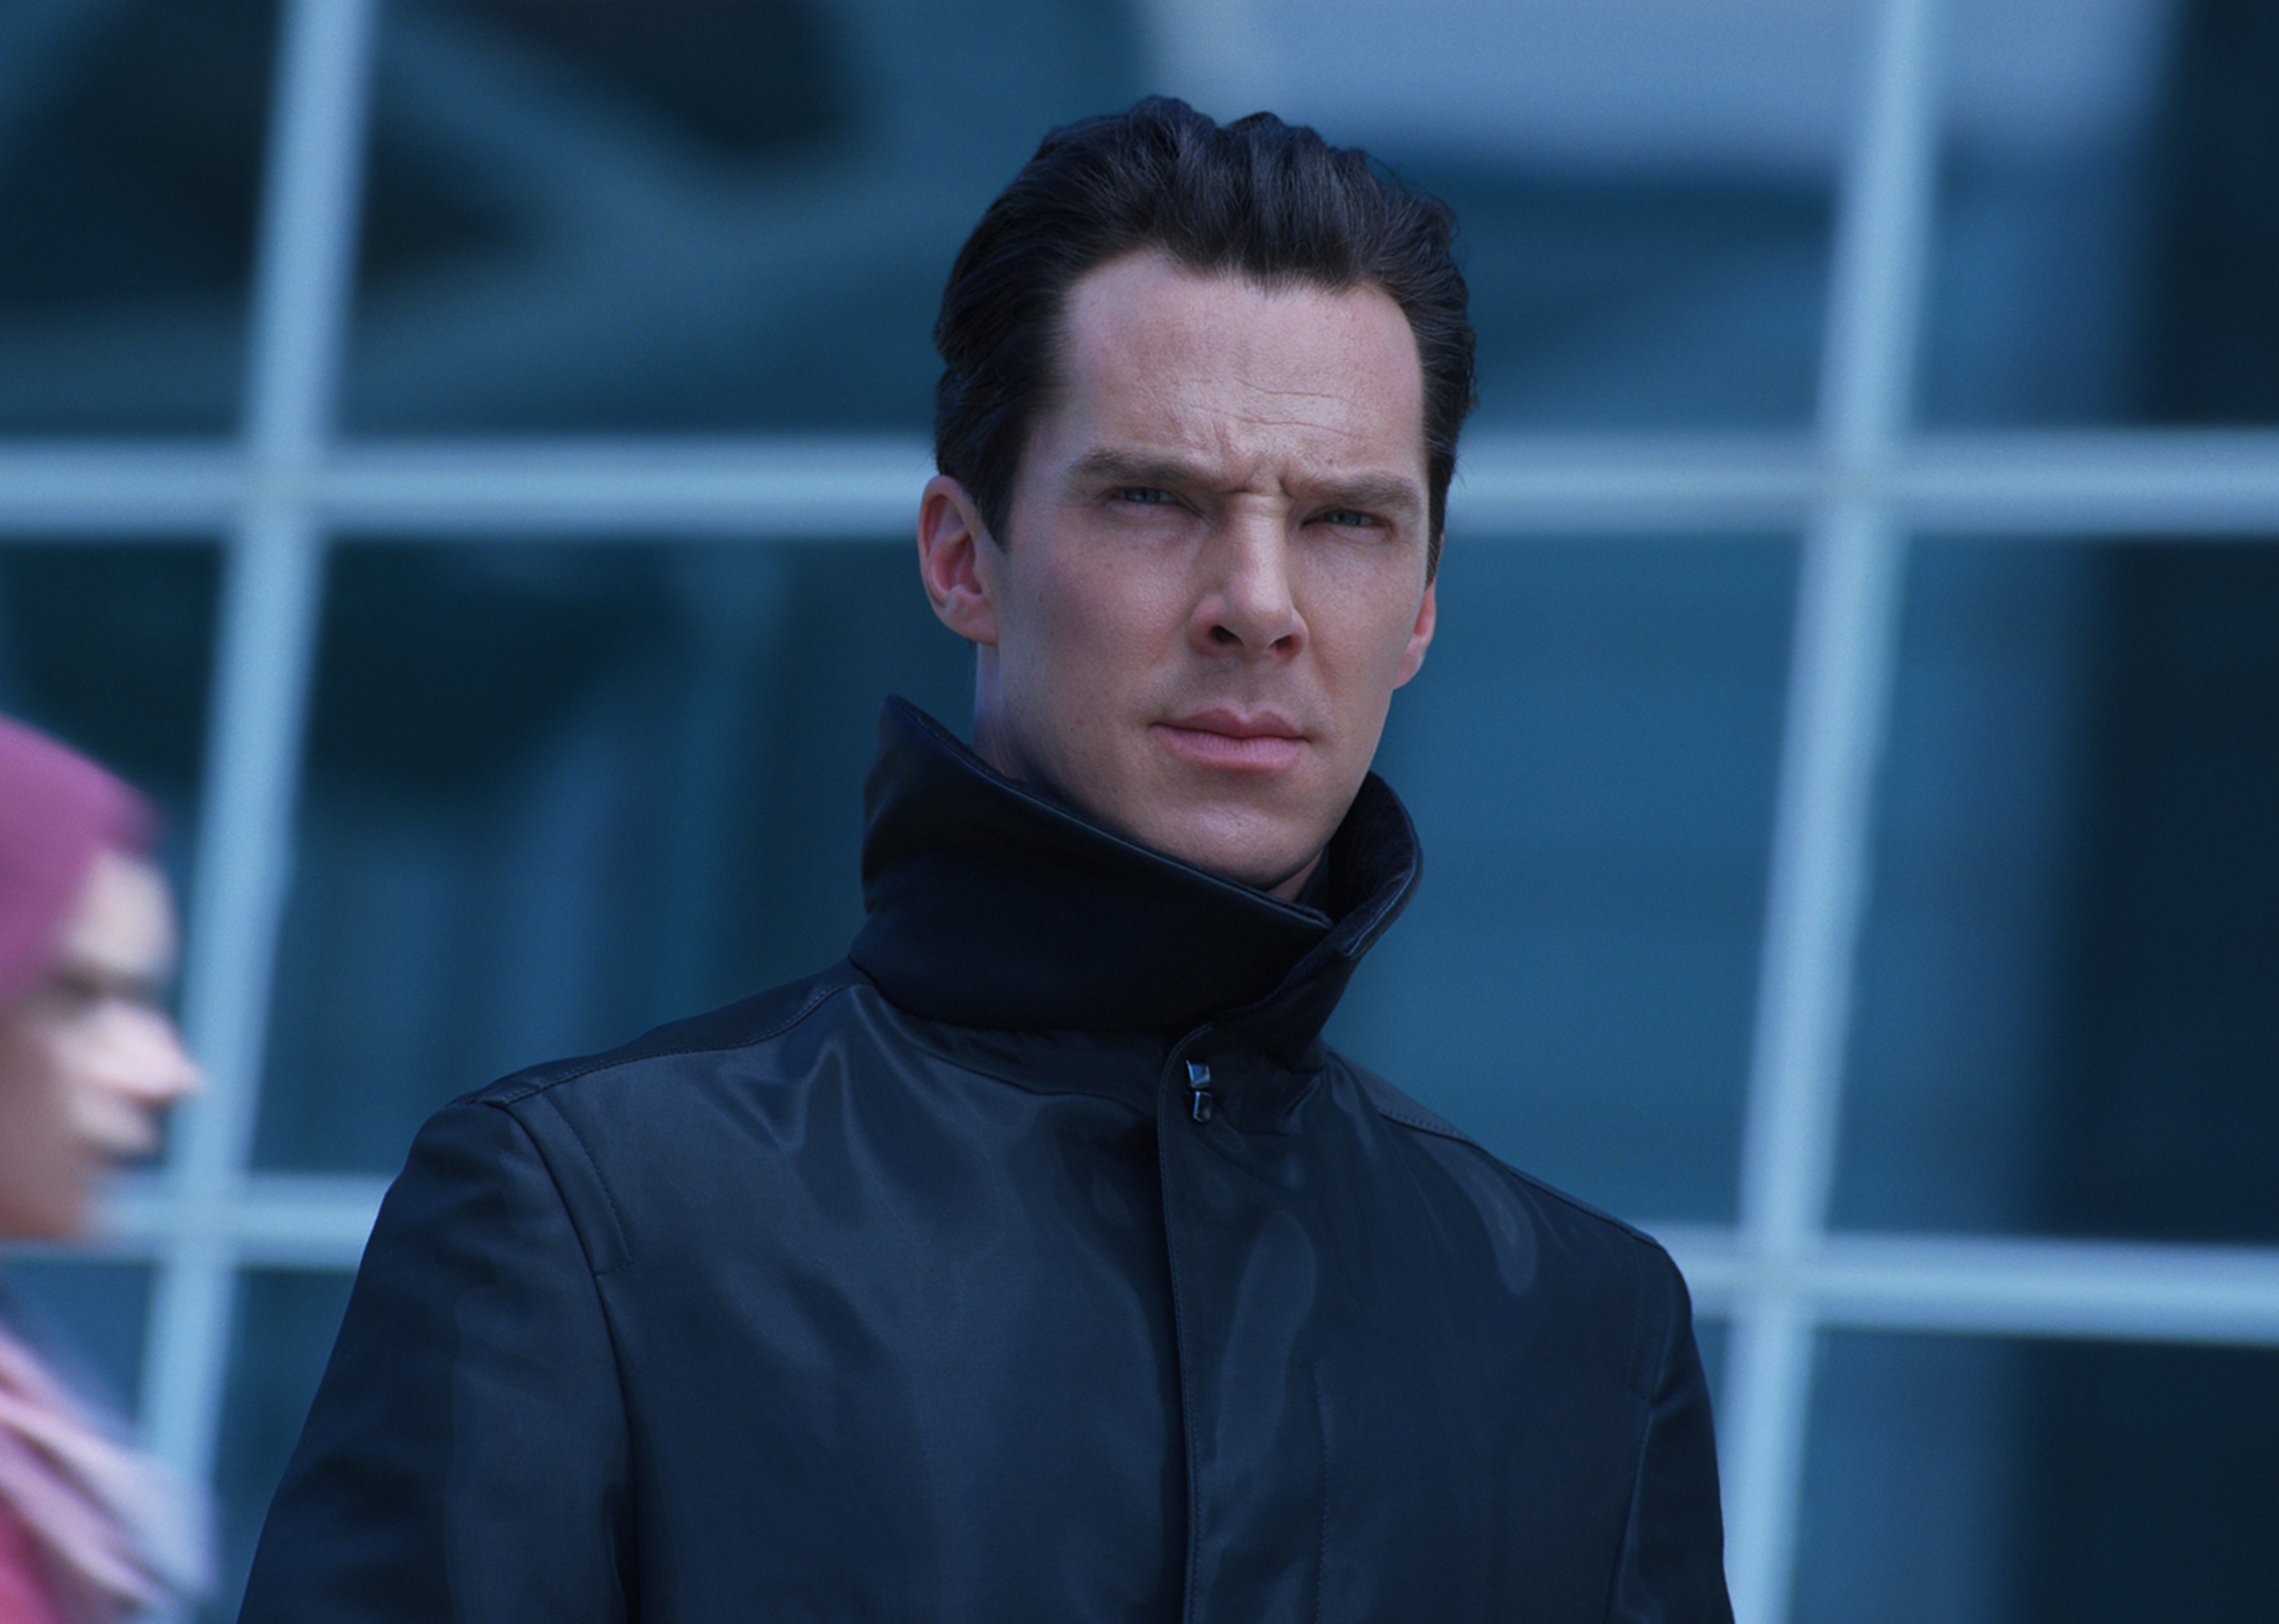 <p>In 2013, <em>Star Trek Into Darkness </em>was released. While there was a weird attempt to keep people from knowing Benedict Cumberbatch was playing Khan, the movie still made $467.4 million worldwide. Then, in 2016, <em>Star Trek Beyond</em> was dropped. Justin Lin replaced Abrams as director, but the movie dropped to a box office of $343.5 million from a budget of $185 million.</p><p>You may also like: <a href='https://www.yardbarker.com/entertainment/articles/the_20_best_instrumental_songs_of_all_time_031524/s1__33393467'>The 20 best instrumental songs of all time</a></p>